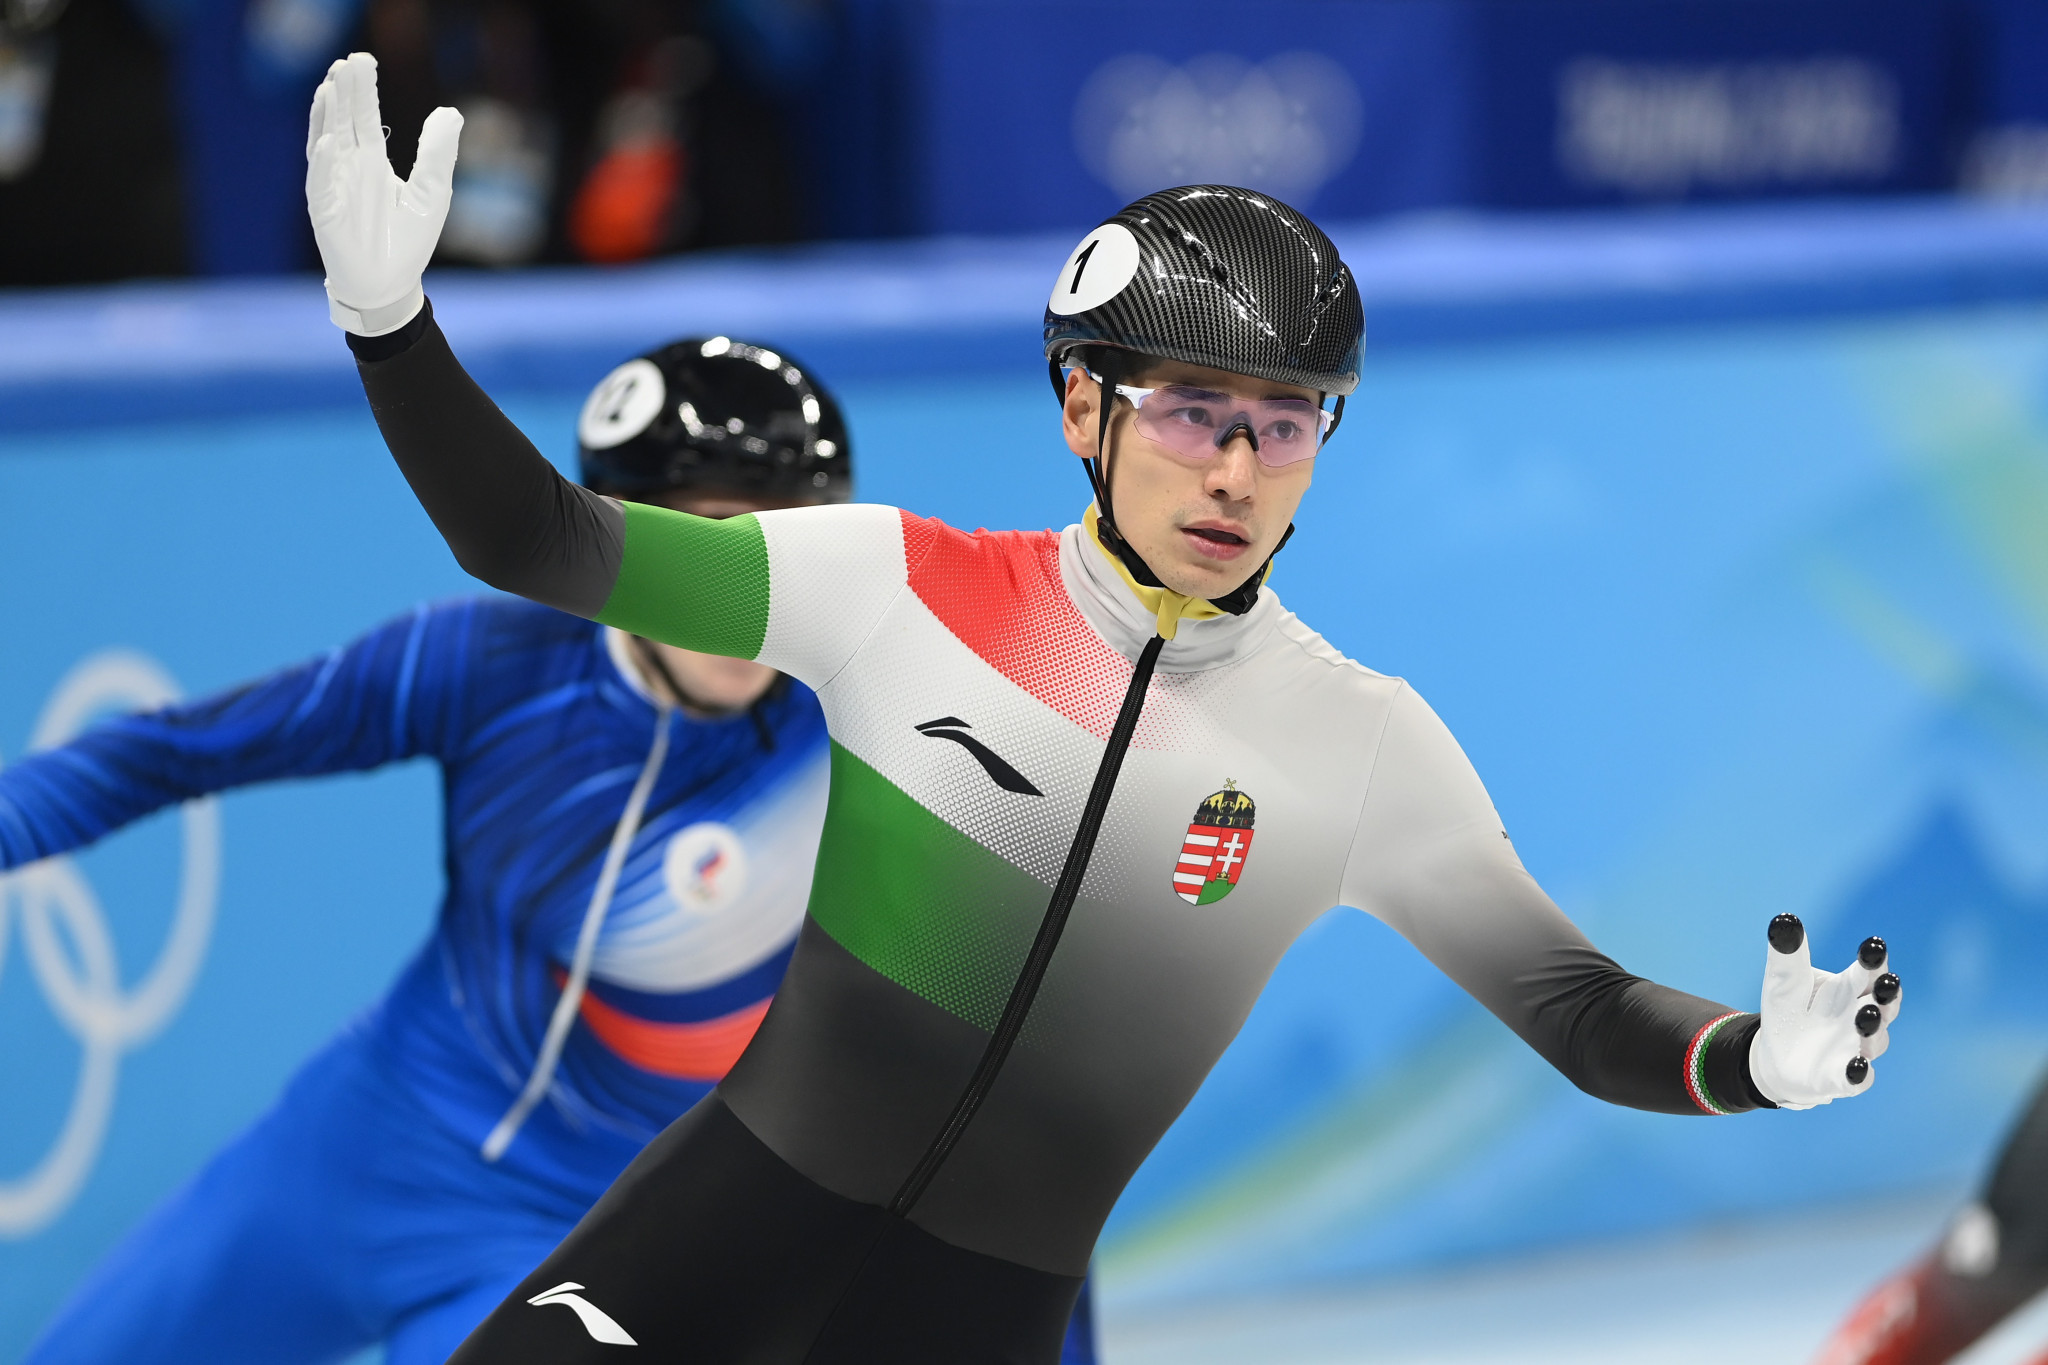 World Athletics short track innovation to open world of opportunities